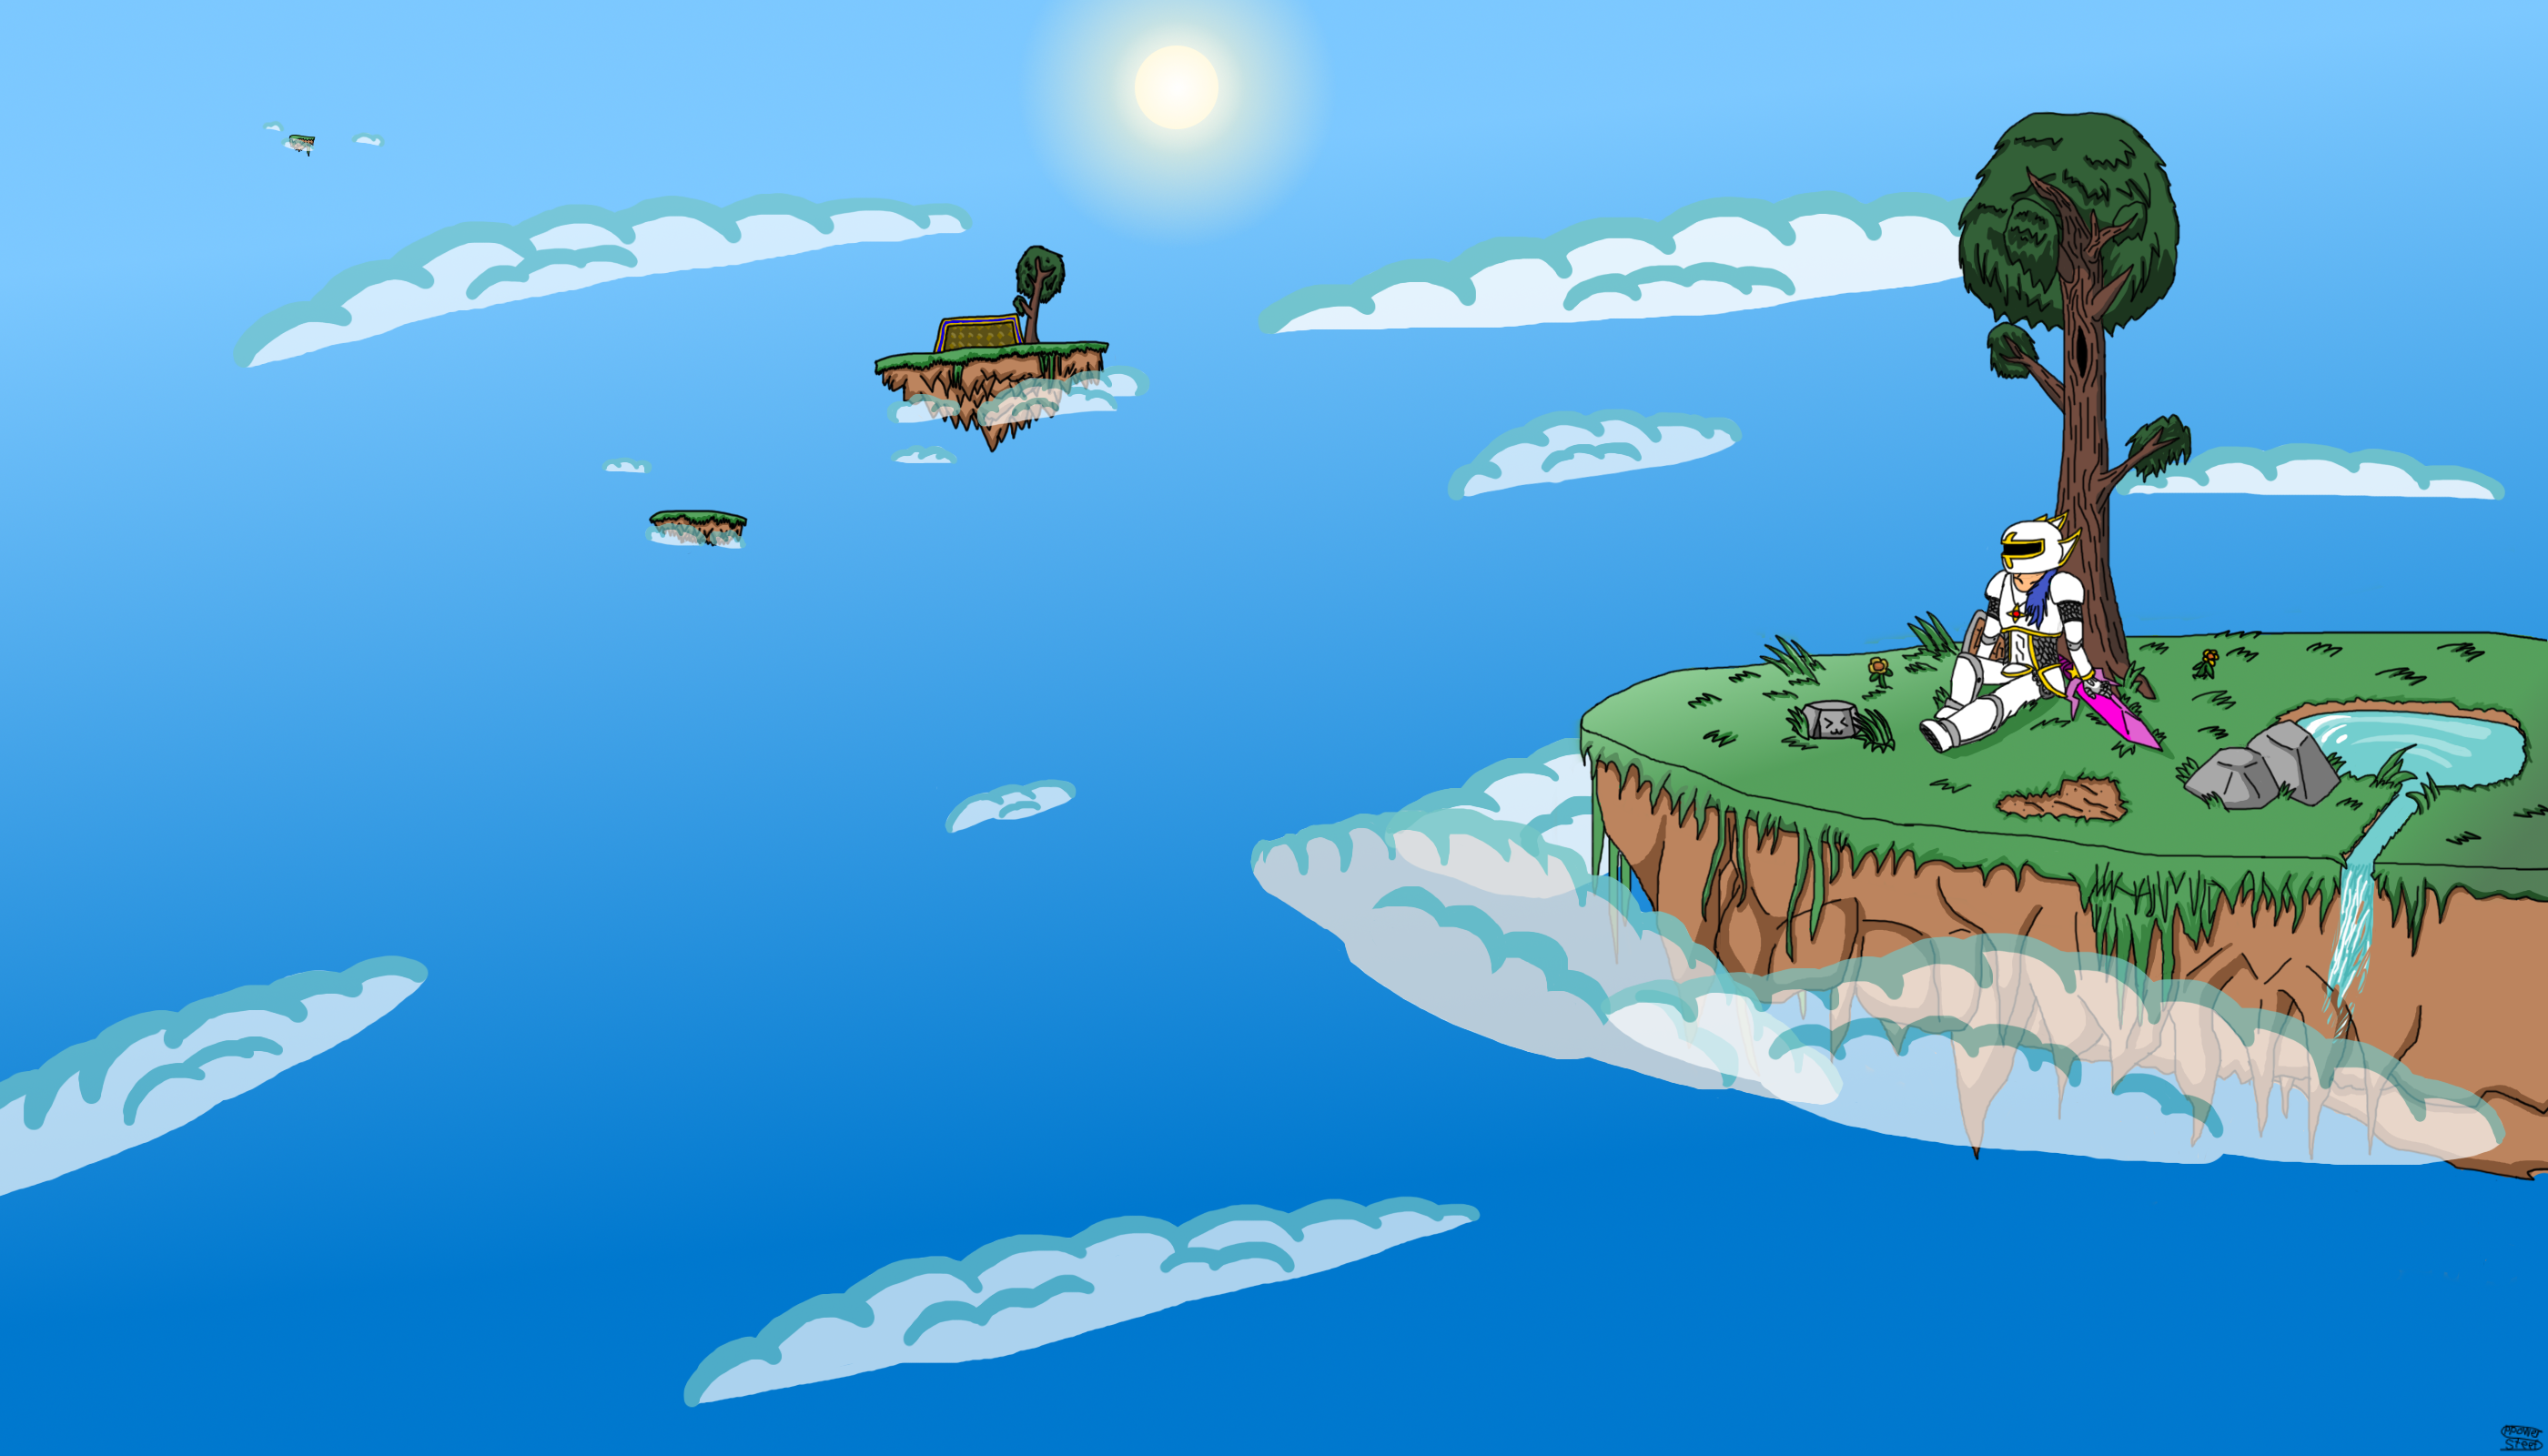 terraria_wallpaper__floating_islands_by_ppowersteef-d9hhwnw.png